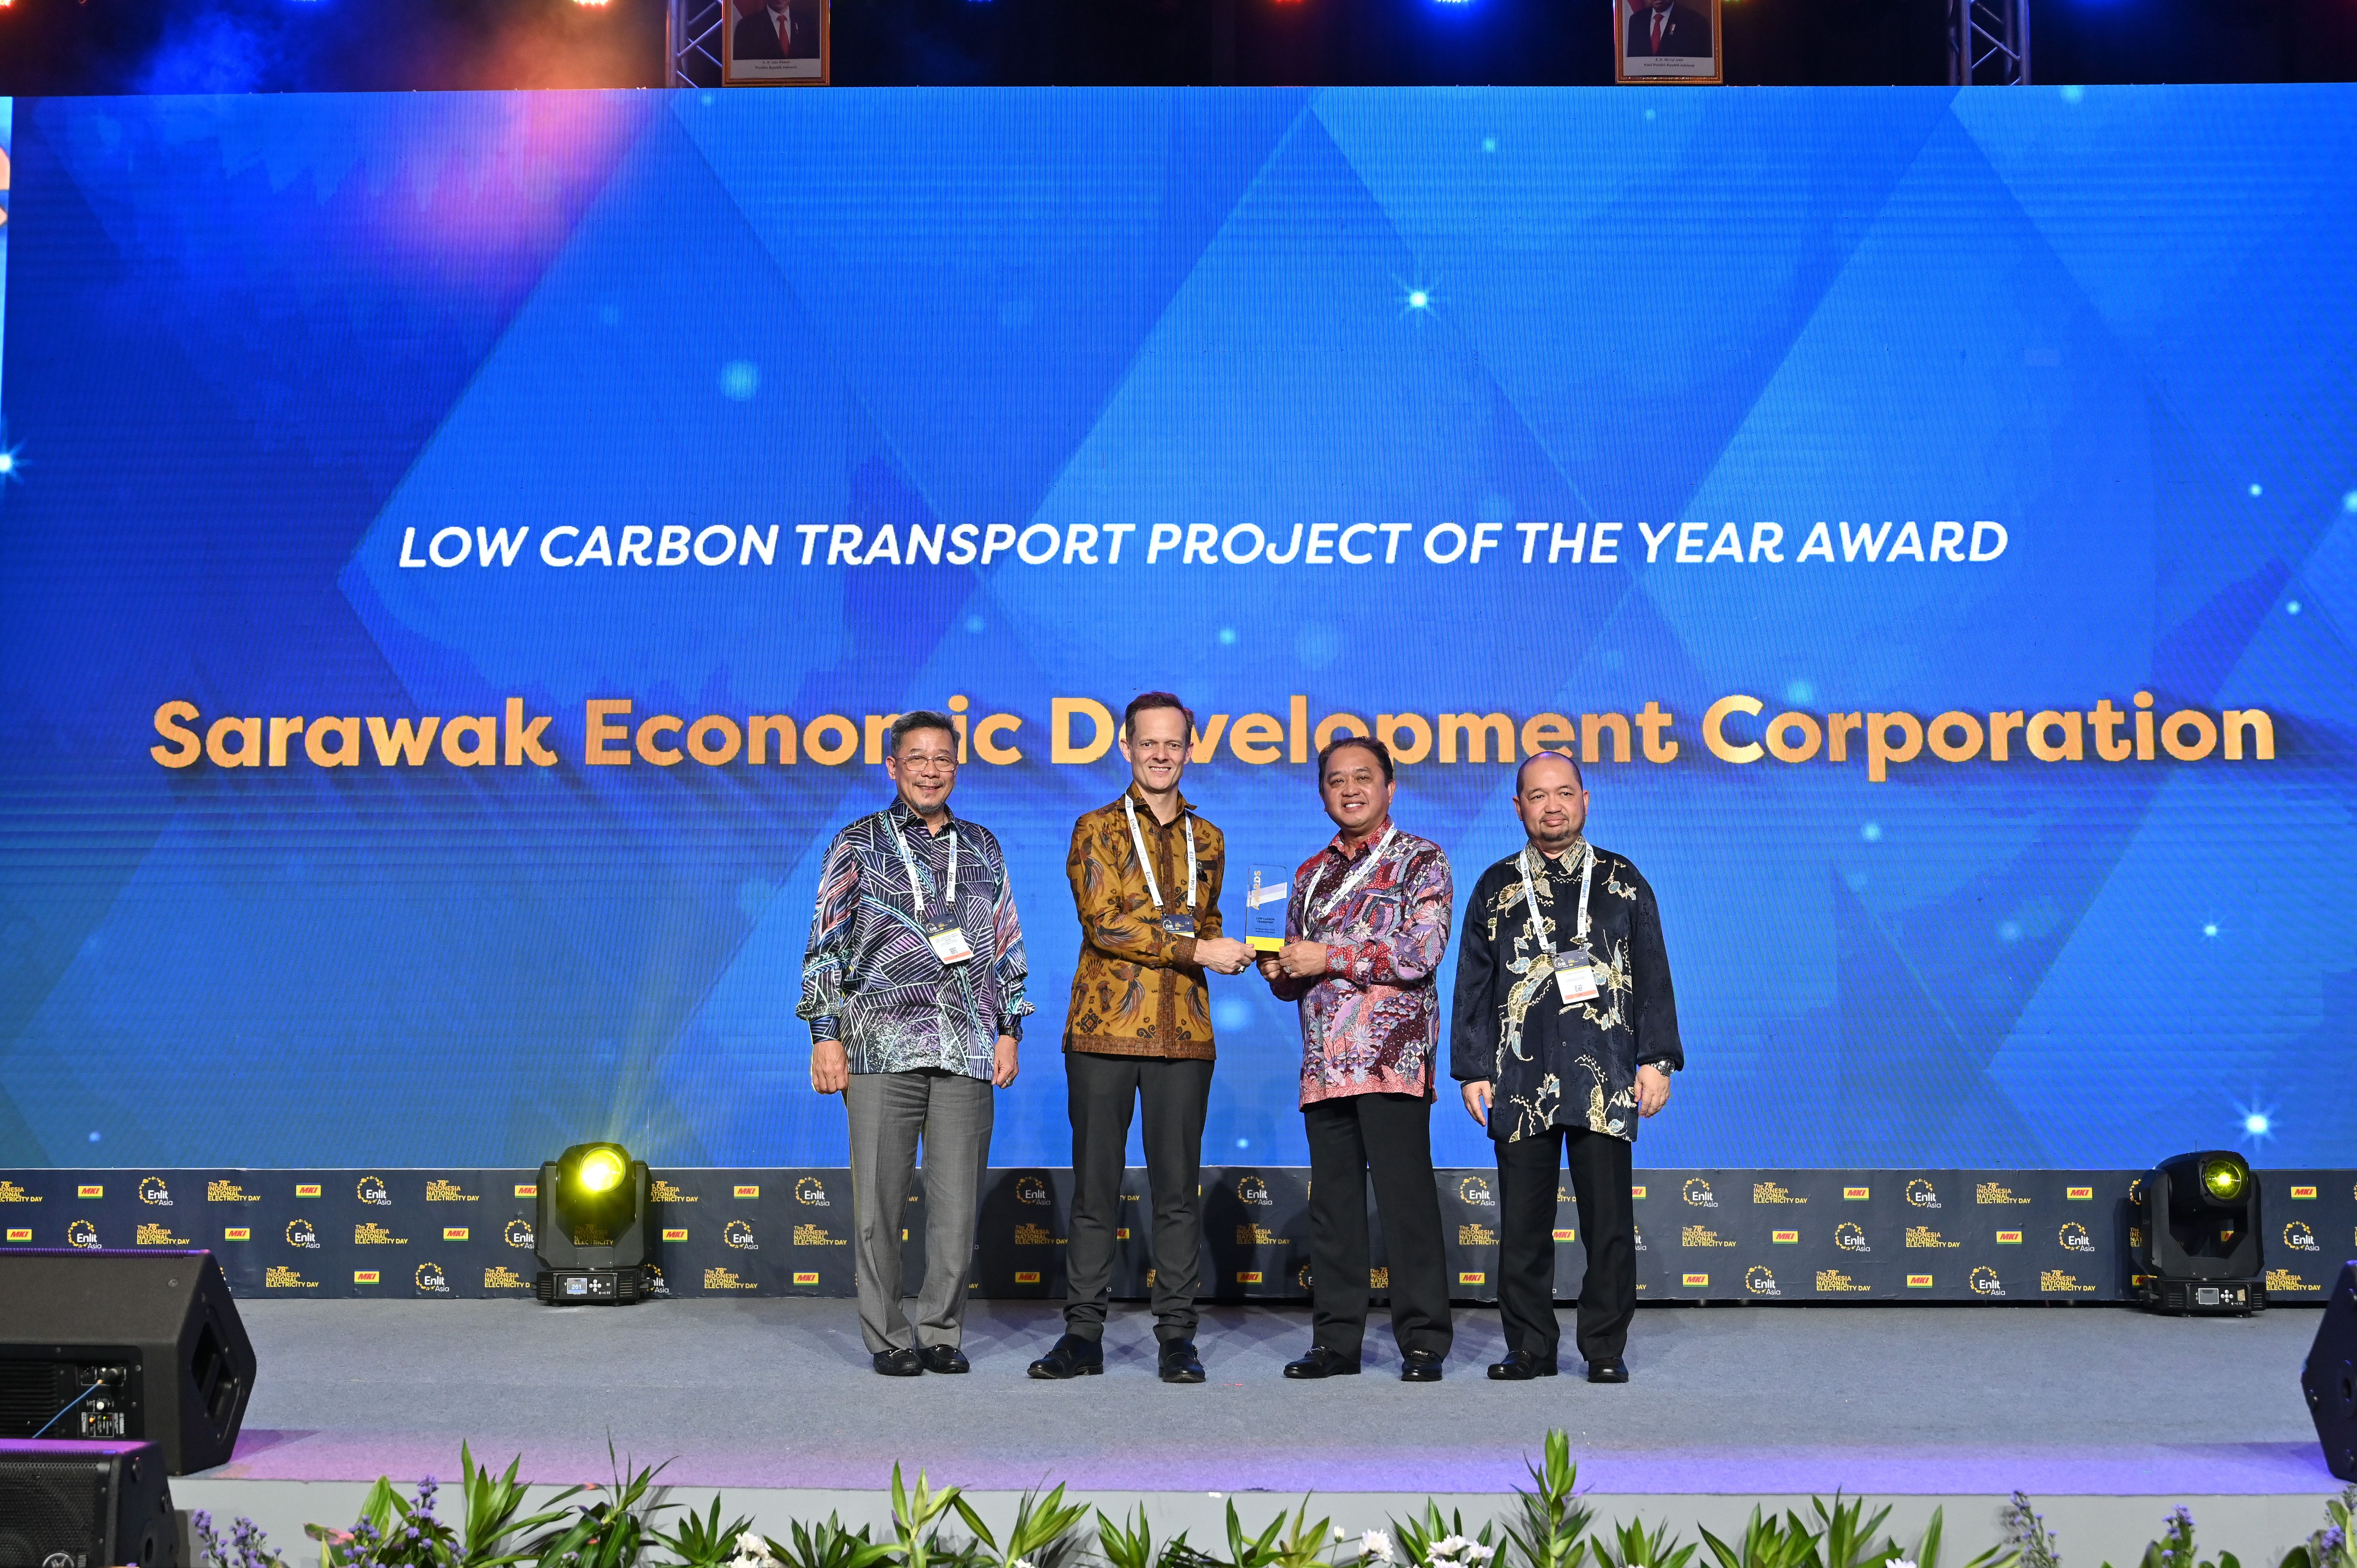 Low Carbon Transport Project of the Year